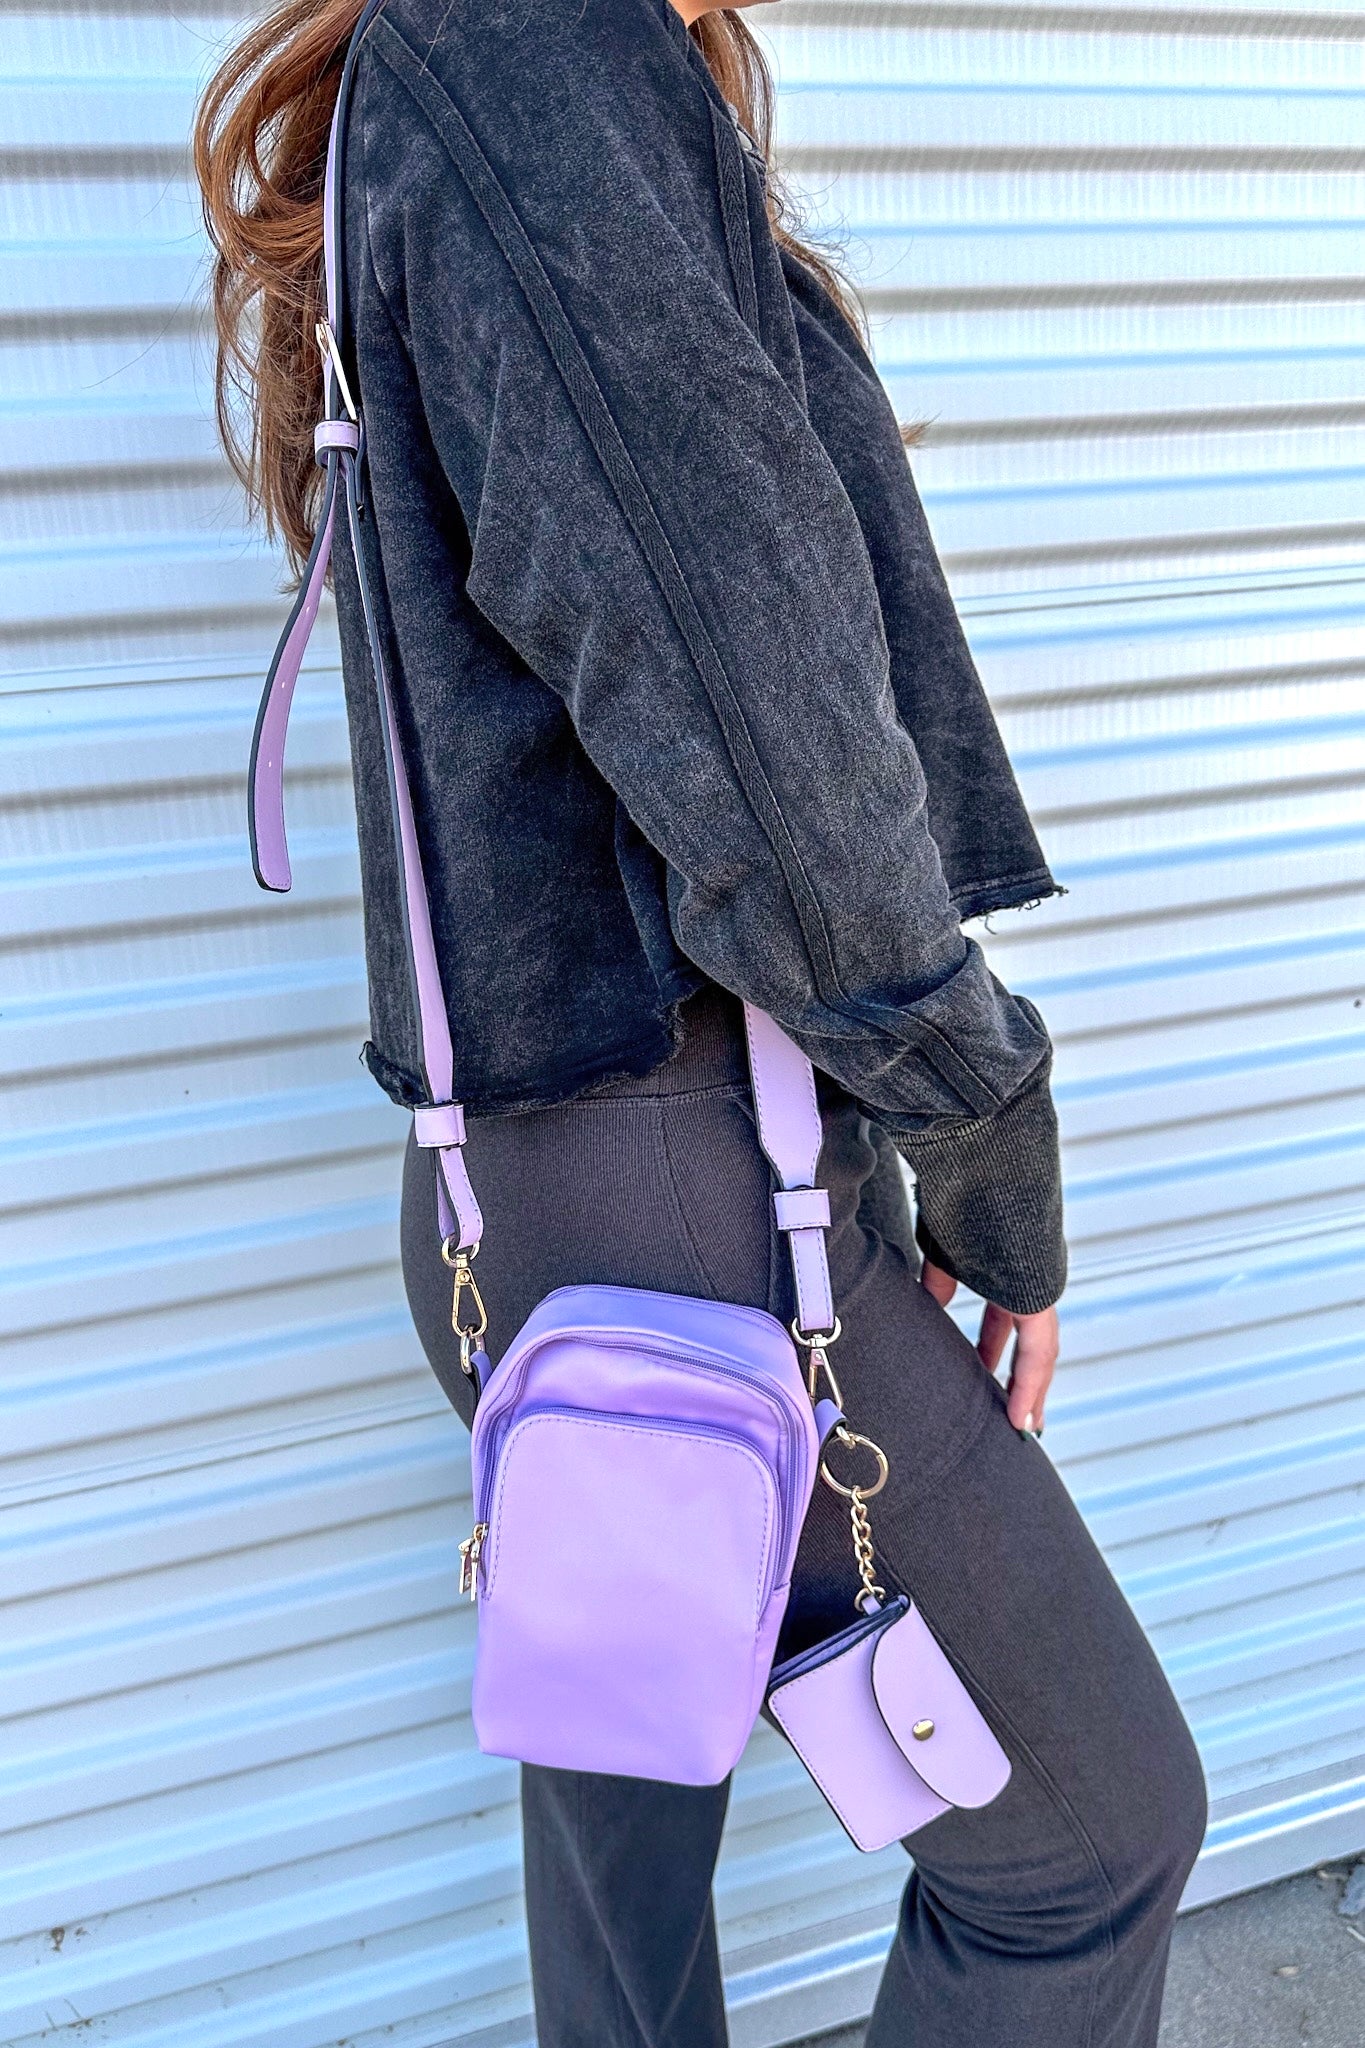 The Parker Crossbody in Orchid